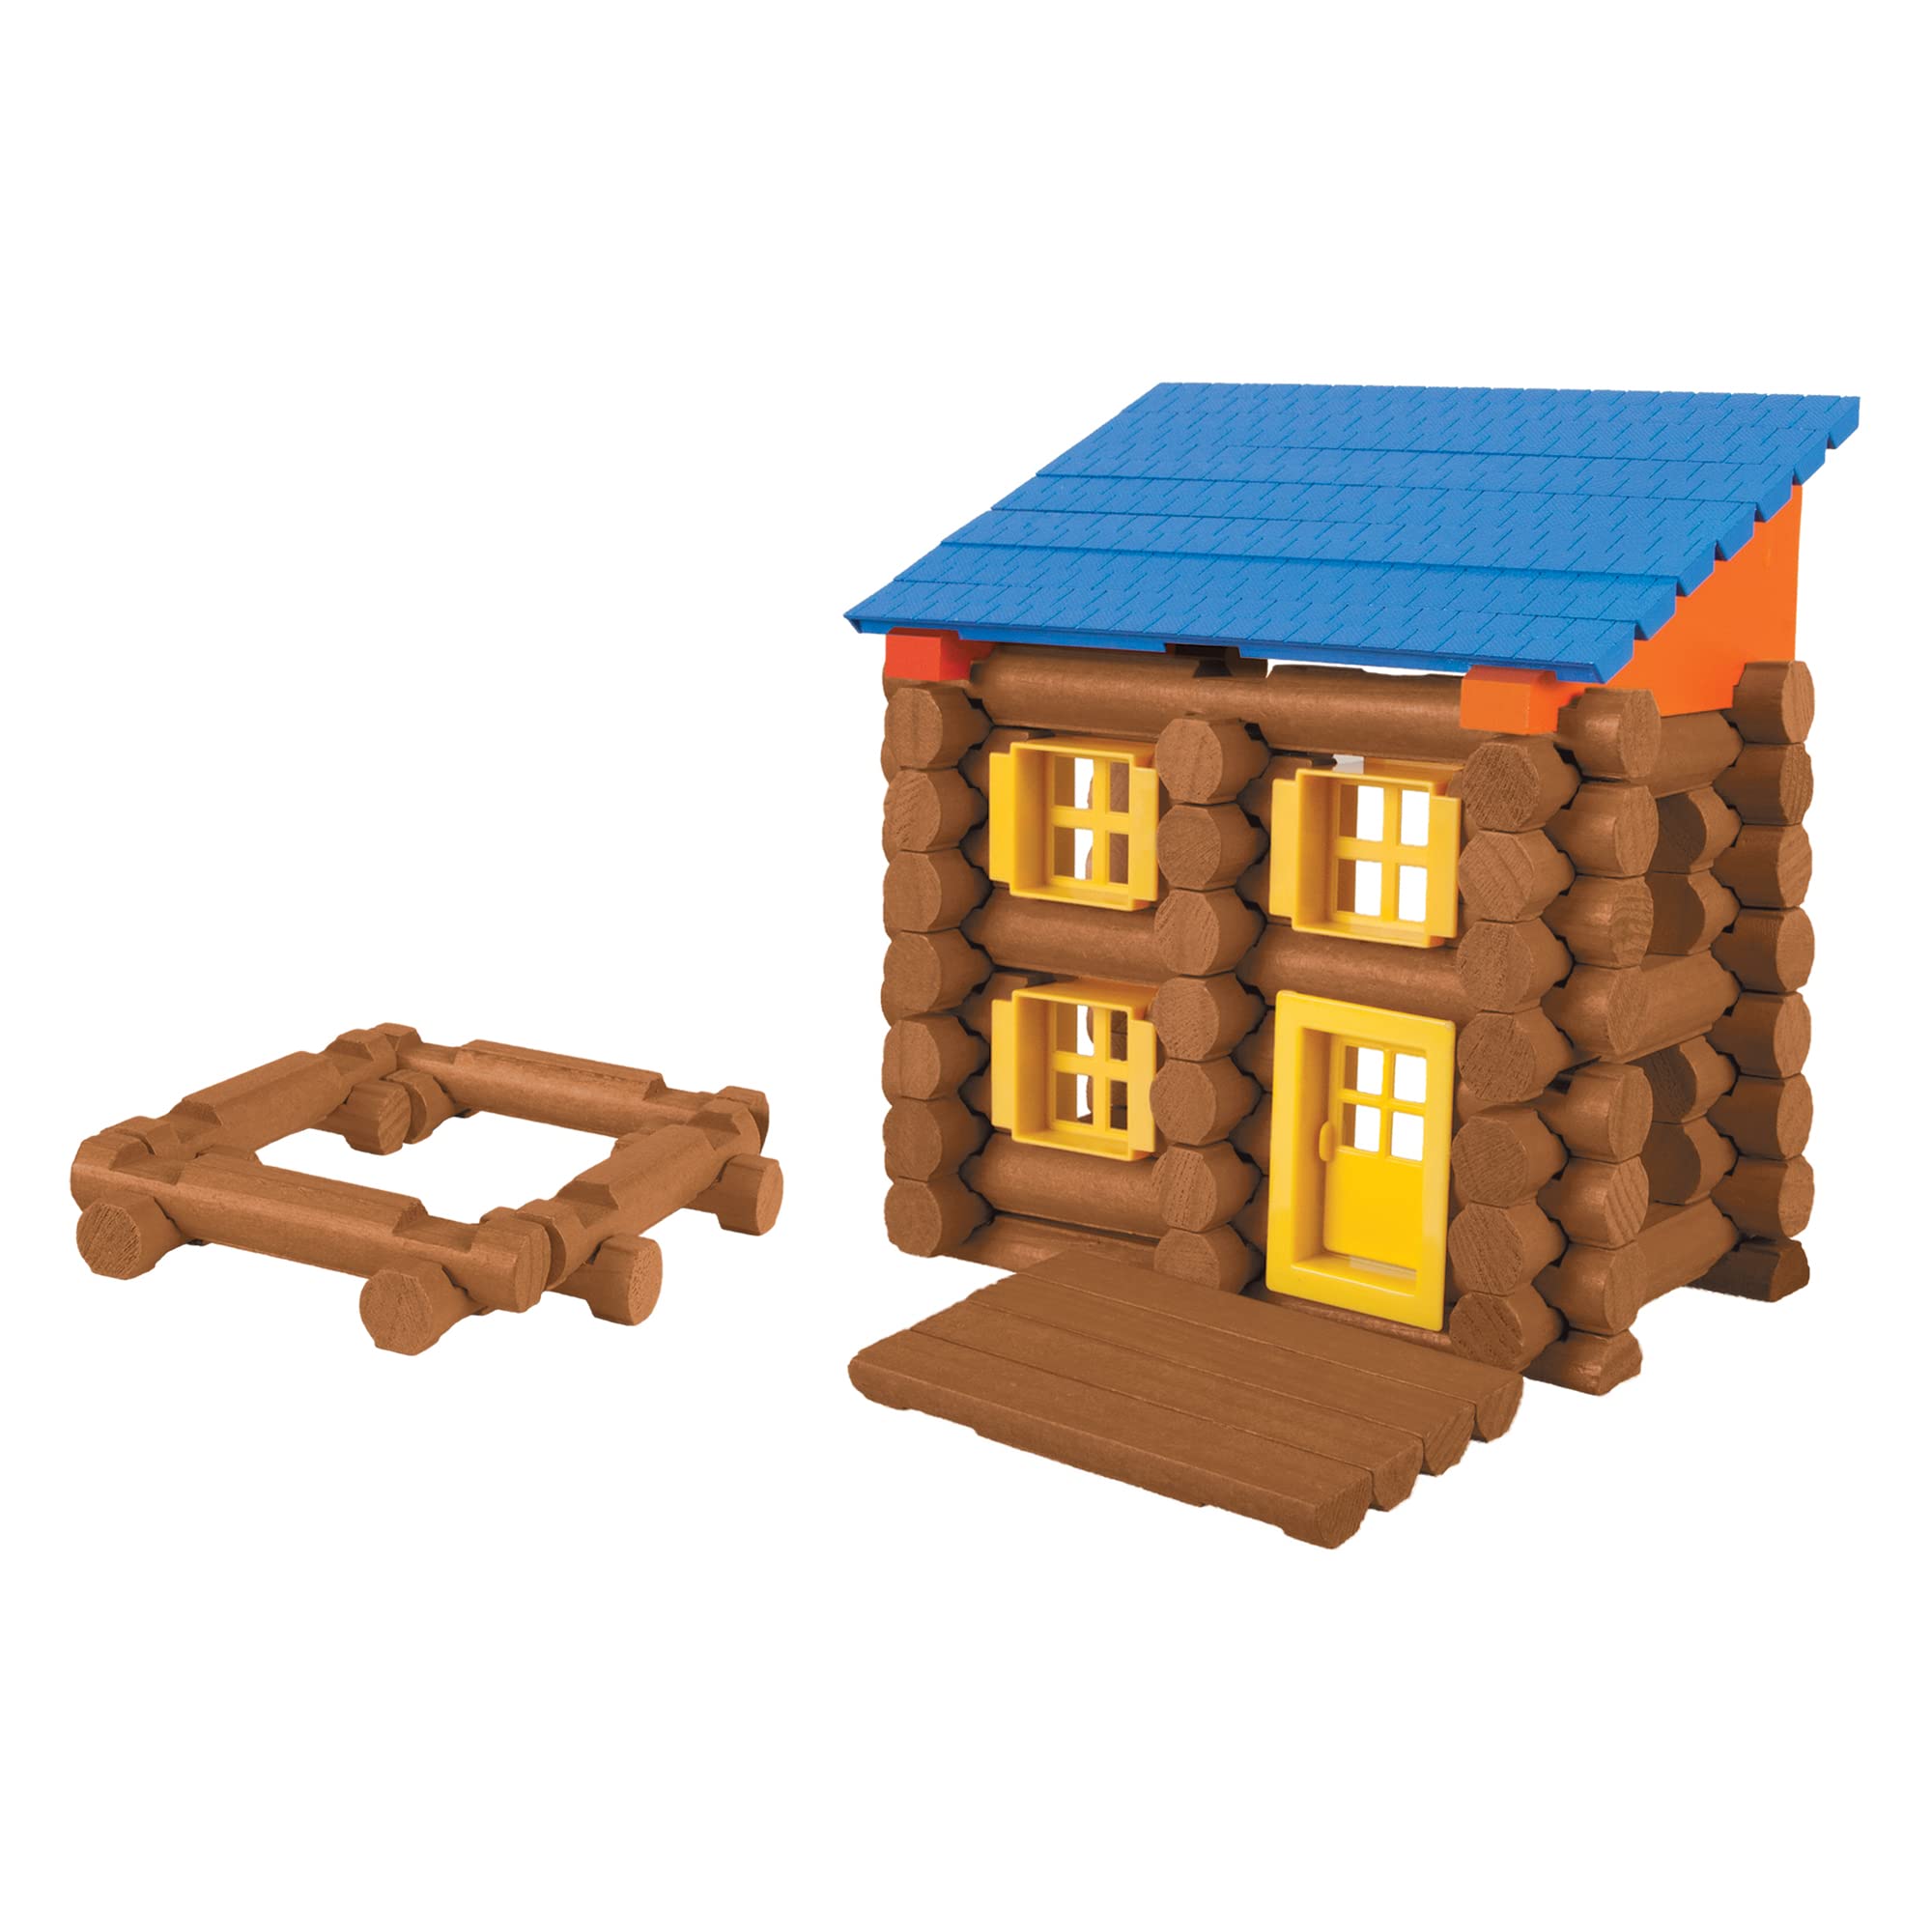 LINCOLN LOGS – Oak Creek Lodge – 137 Pieces - Real Wood Logs-Ages 3+ - Best Retro Building Gift Set for Boys/Girls – Creative Construction Engineering – Top Blocks Game Kit - Preschool Education Toy